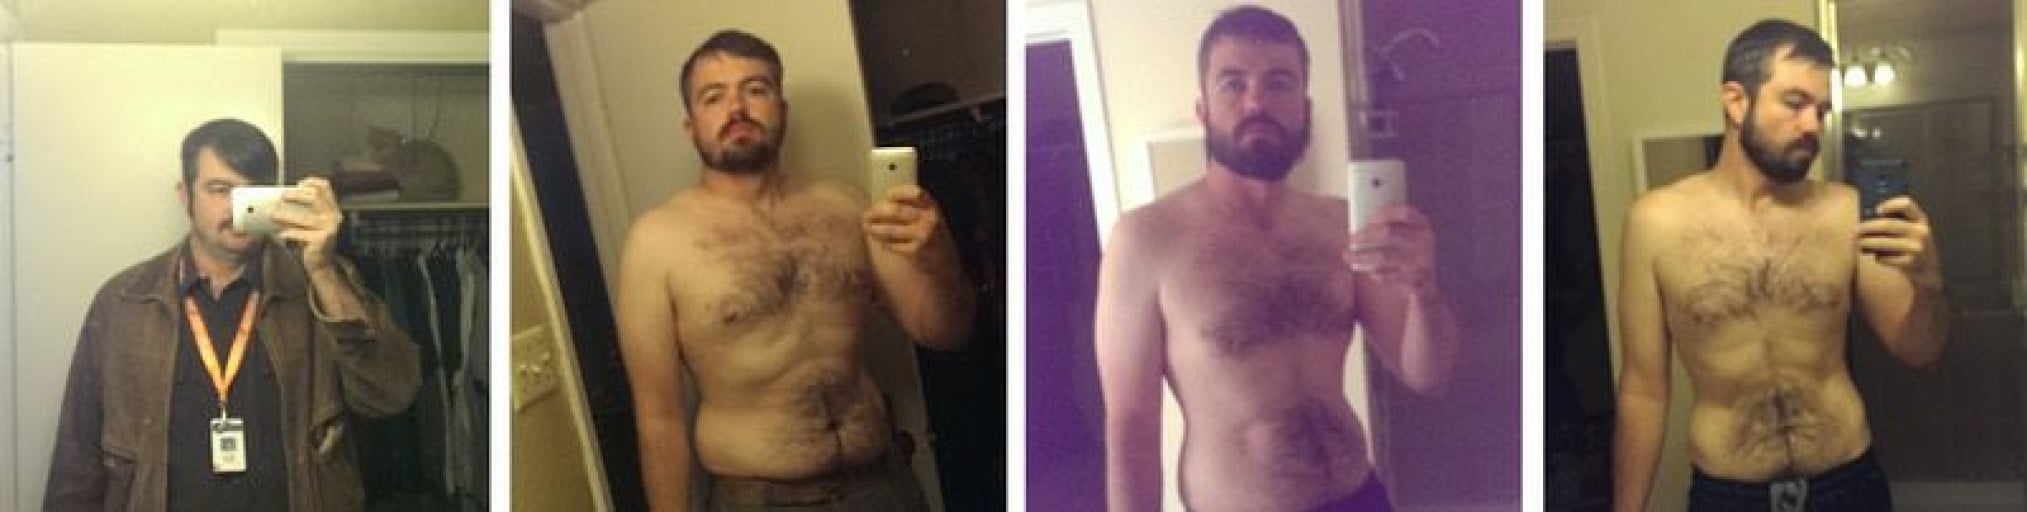 How One Redditor Lost 60 Pounds in 5 Months